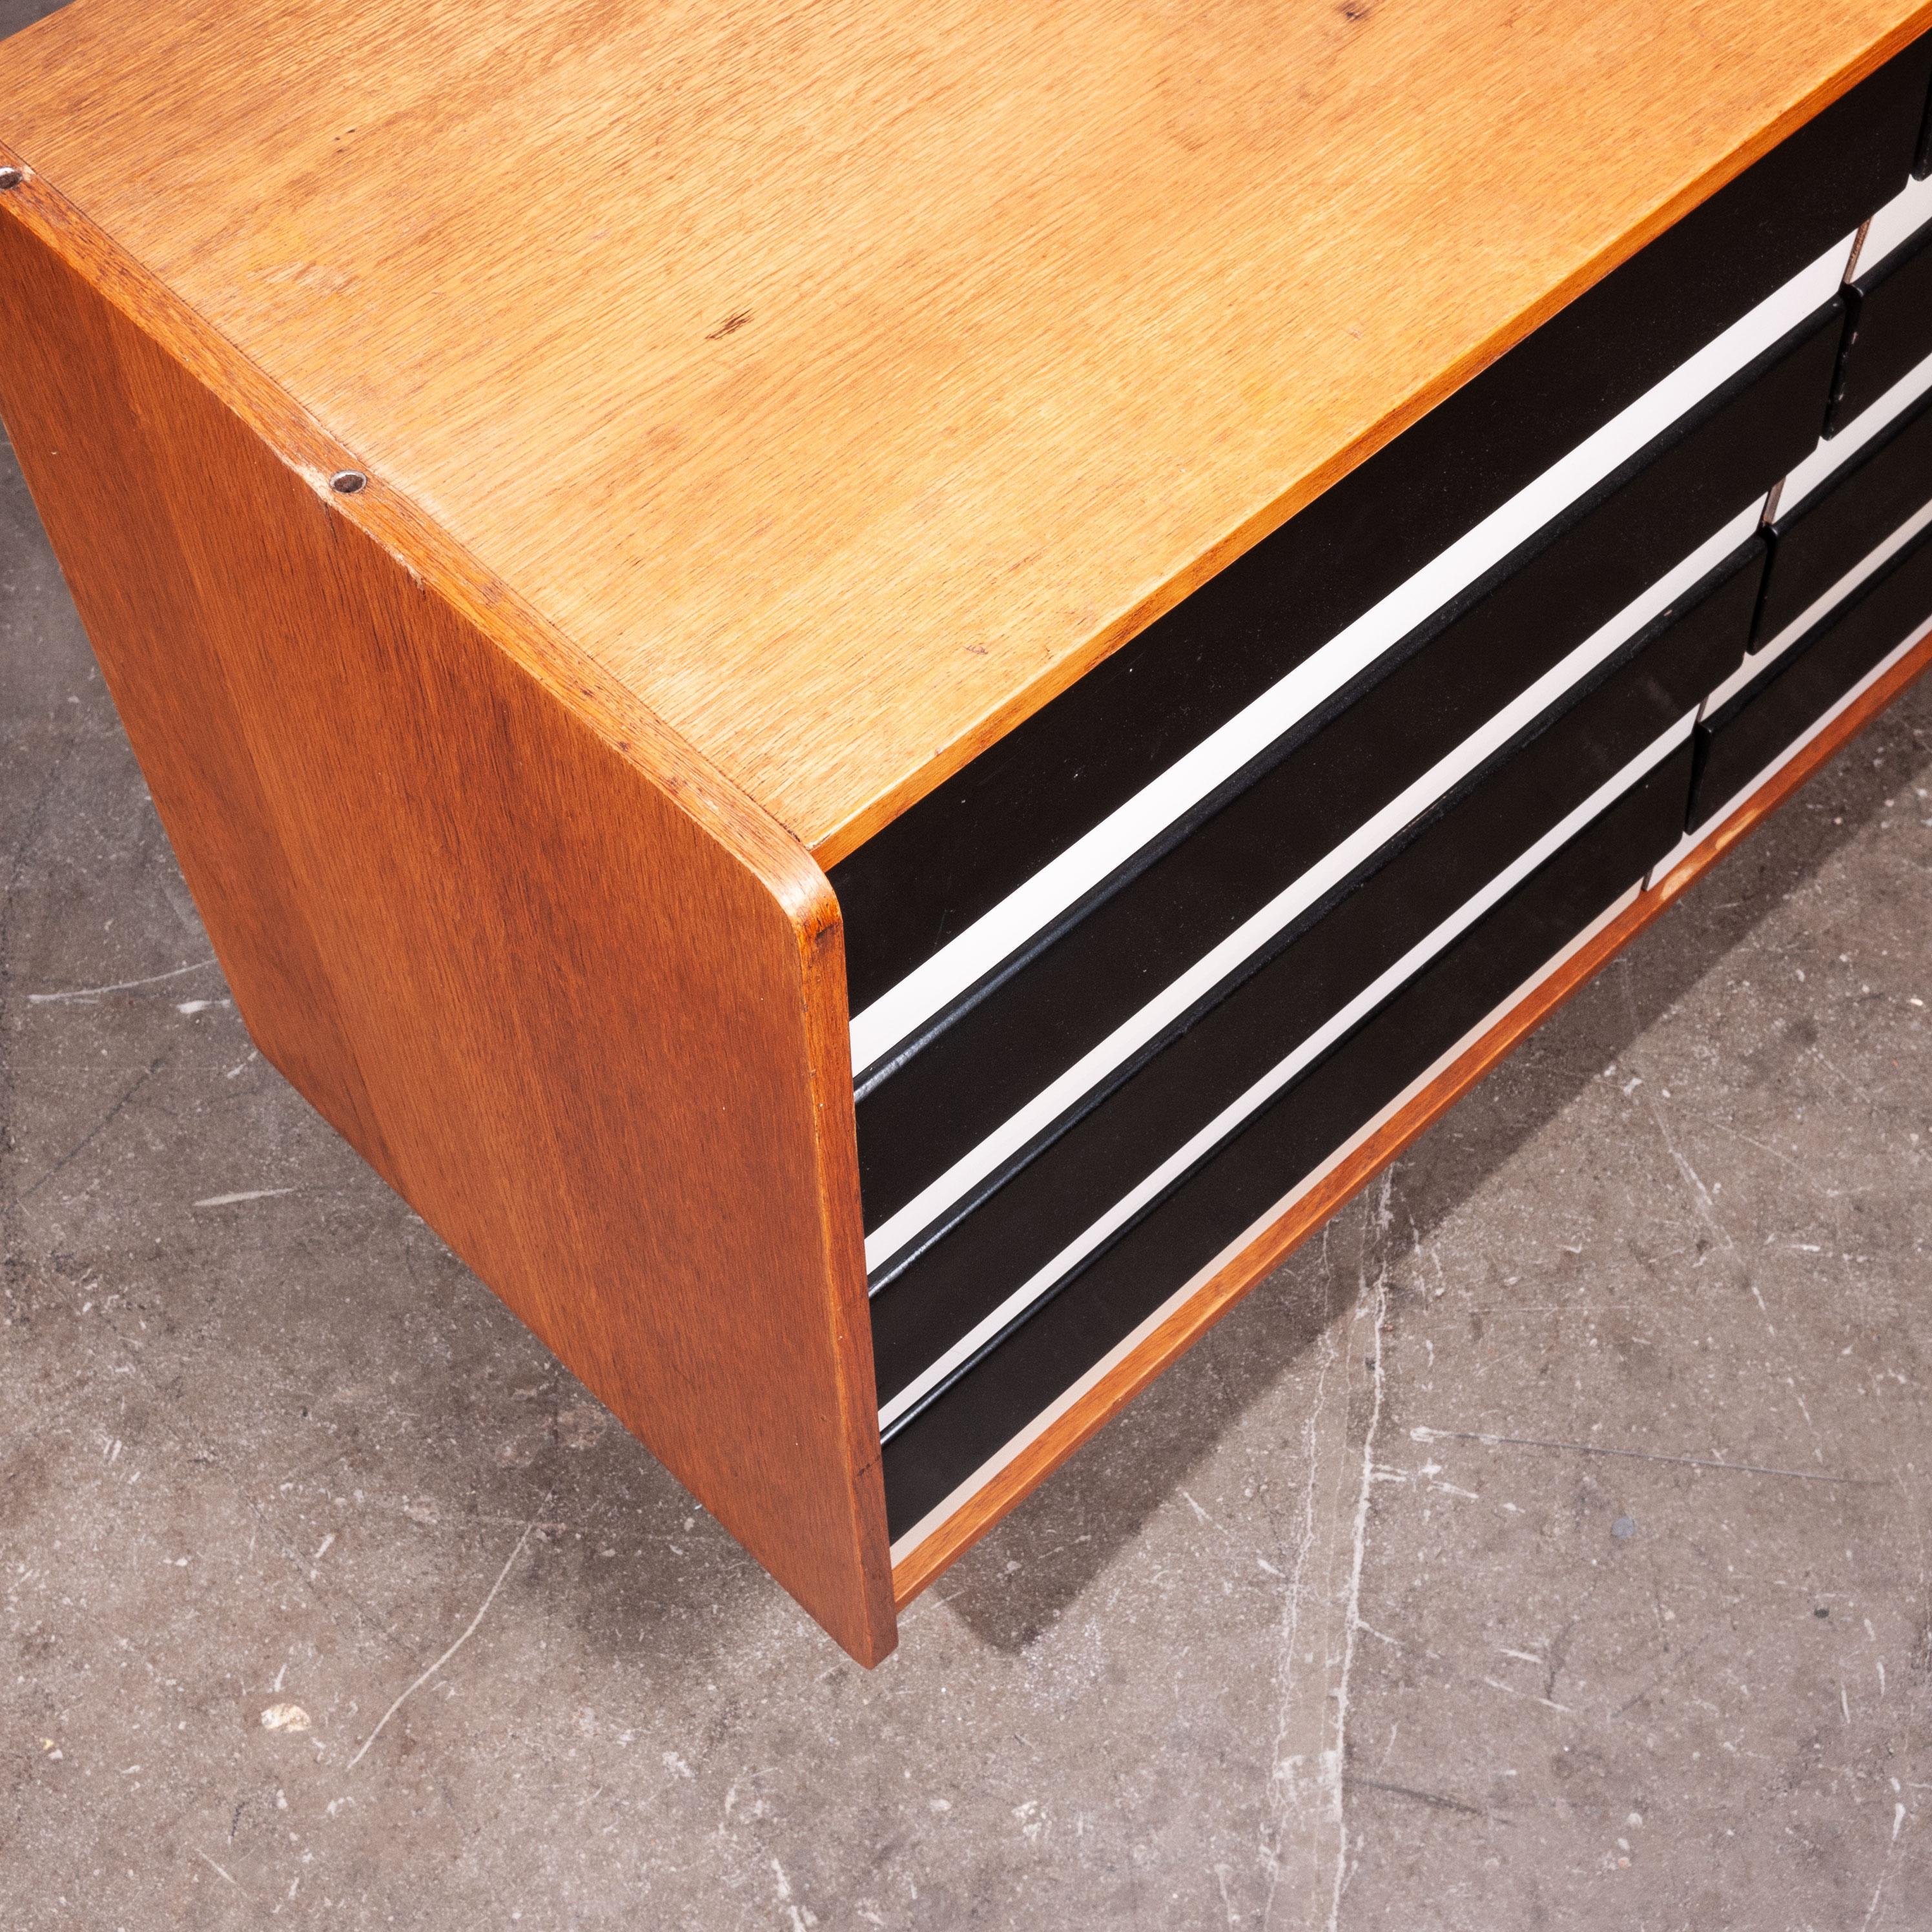 Model U-453, 1950s vintage eight drawer Oak chest of drawers by Jiri Jiroutek for Interieur Praha. These chest of drawers by Praha are increasingly popular due to their practical size and number of drawers and this piece is a great example. Finished